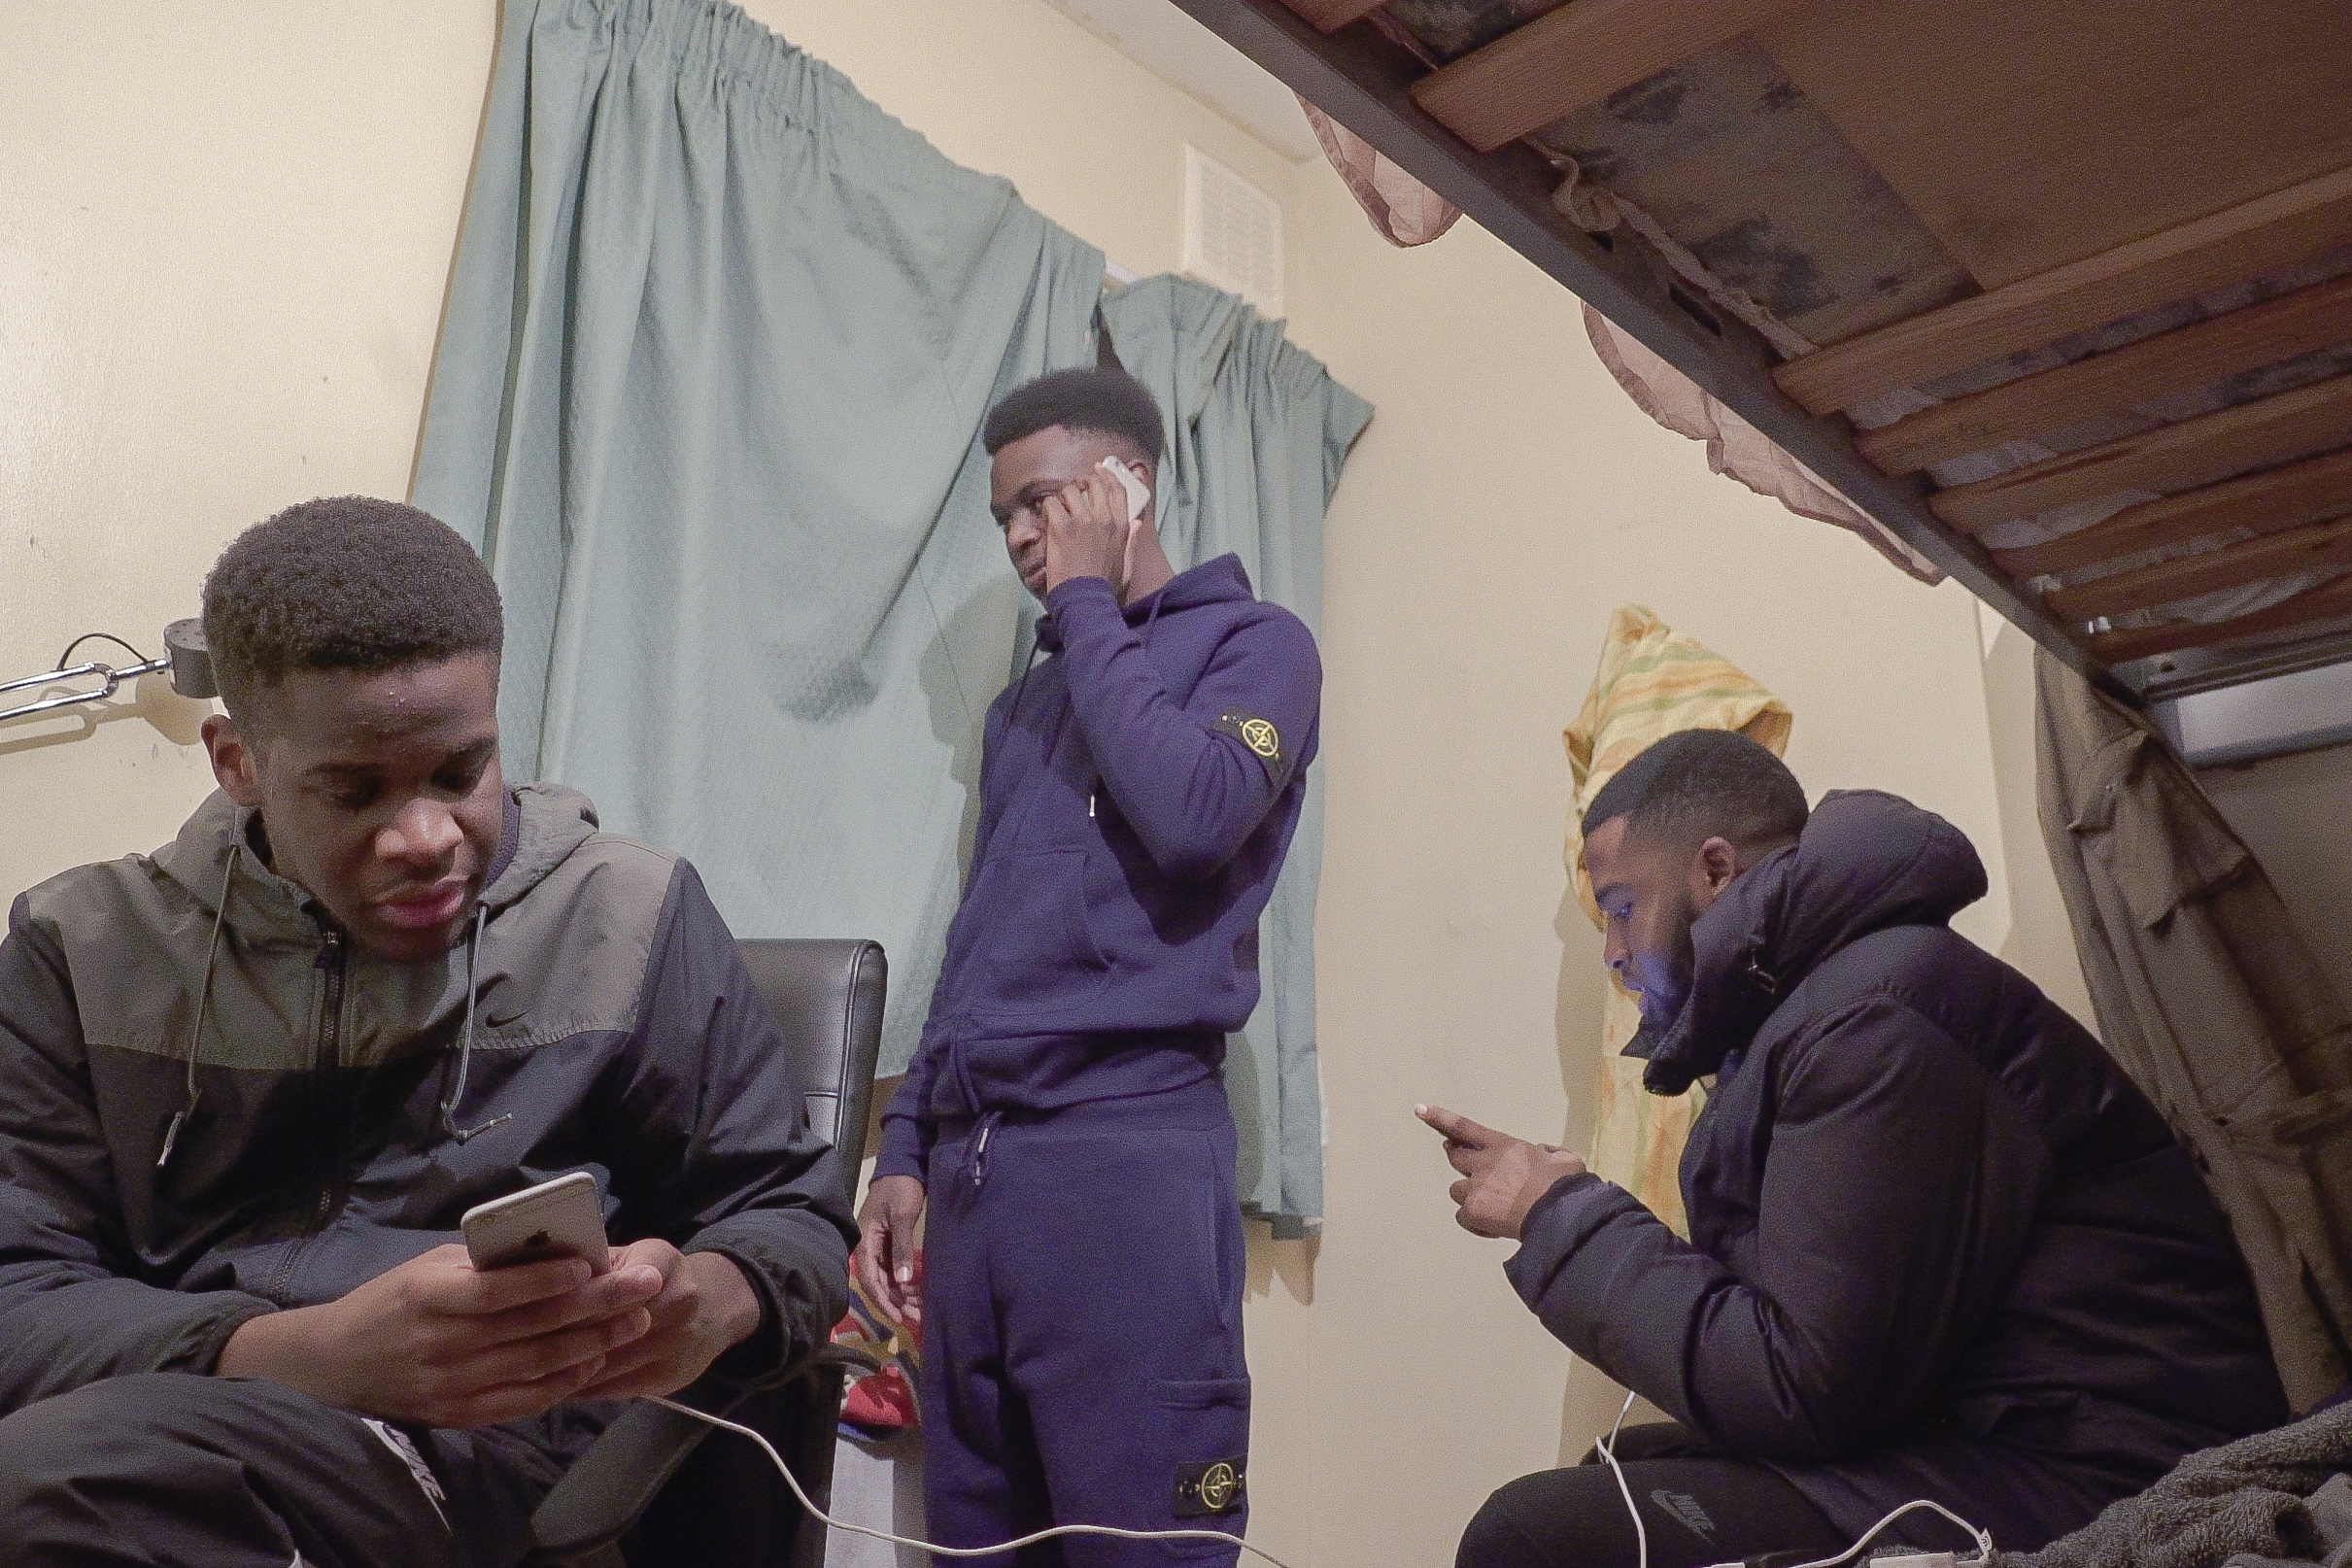 Nathan Miller reveals teasers for ‘LDN’: a documentary about London’s influential music scene